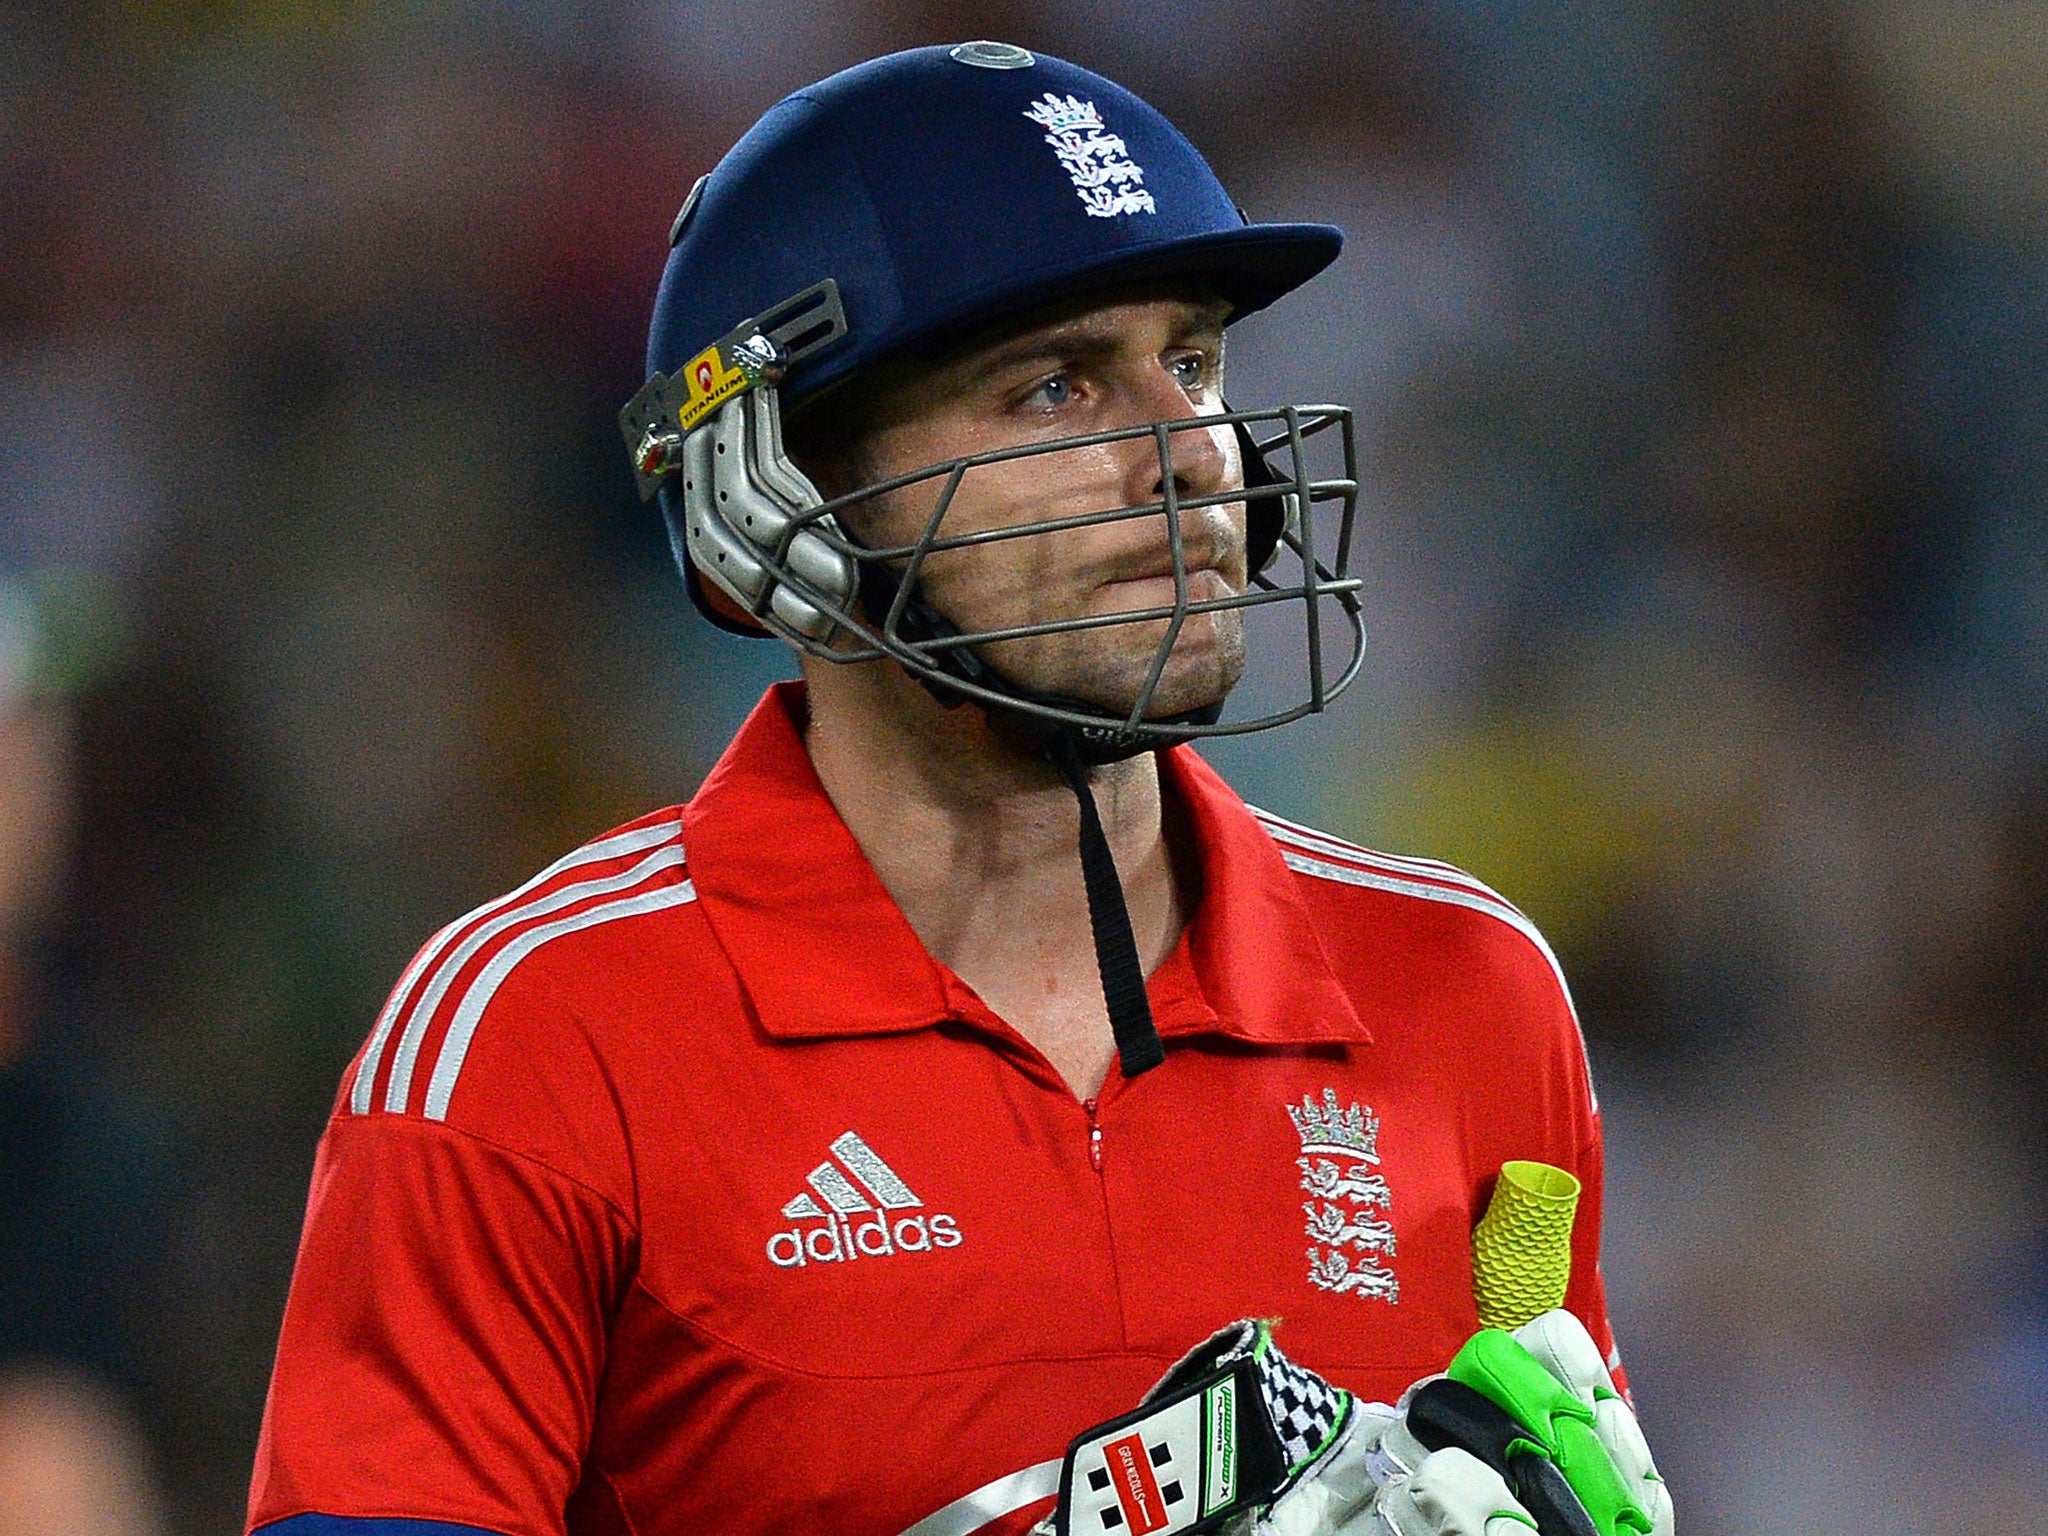 Luke Wright is hoping the absence of axed batsman Kevin Pietersen will help him secure his place in the England team